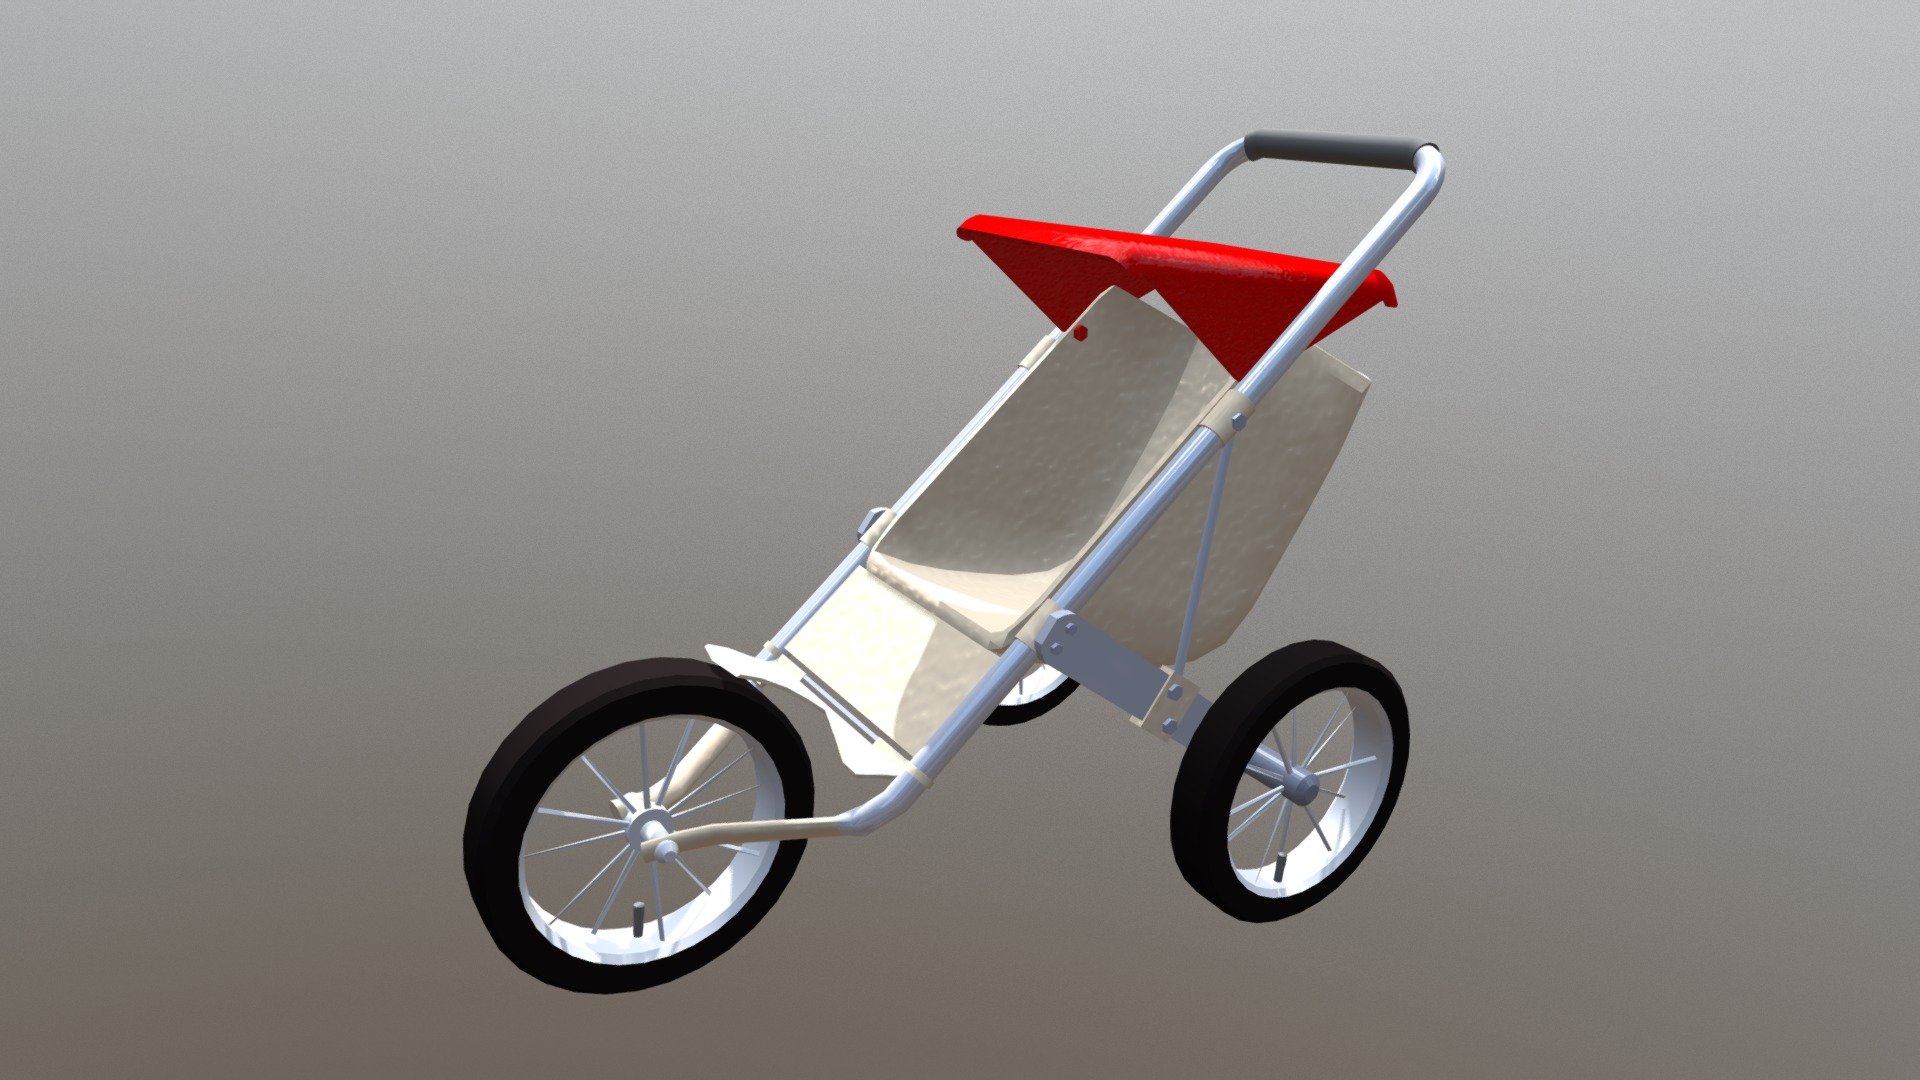 A model of a 3-wheel stroller.
This is a more rugged stroller for when you need to take your baby or toddler off-road. Though keep in mind that in exchange for the sturdiness, this stroller doesn't include a cup holder or extra pouches.


Approx 3,874 polygons.
Made entirely with 3 and 4 point polygons.
Includes group information, which your software should interpret as separate parts, which includes: 1 front wheel, 2 rear wheels, Hood.
Although the model includes these parts, this version of the model is not rigged.
Includes logically named materials, such as Tires, Plastic, Metal, and Fabric. This makes it very easy to recolor the model.
The model has basic UV mapping and a &ldquo;fabric